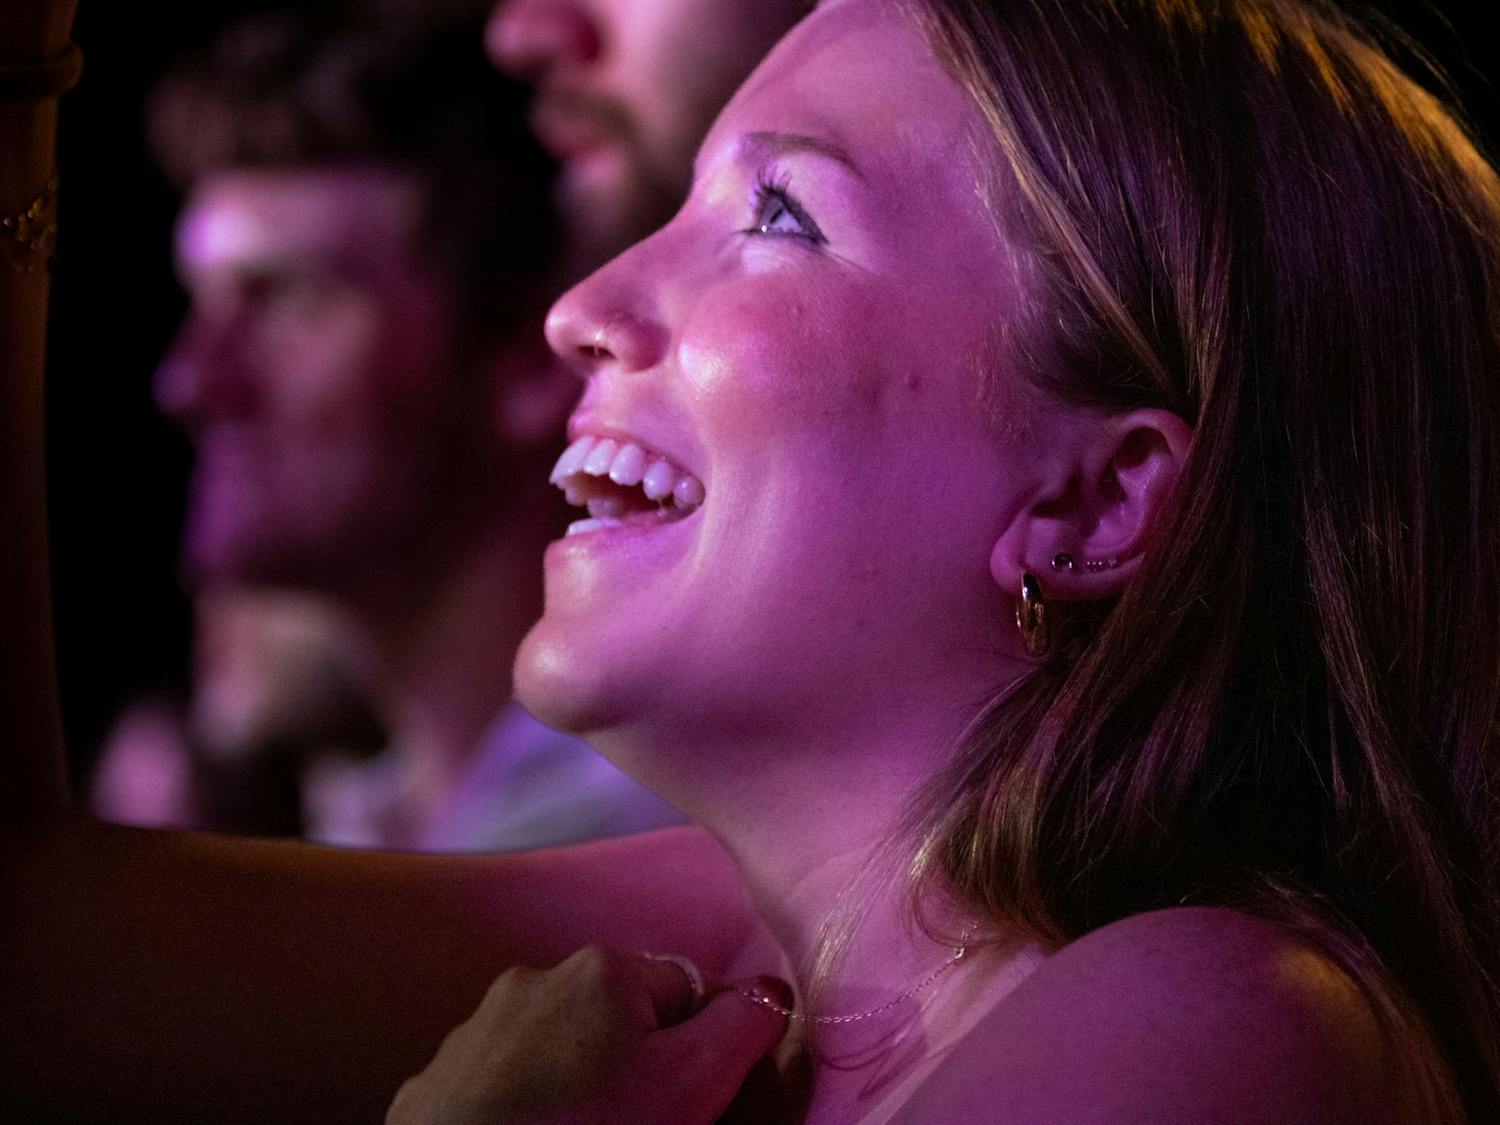 Third-year marketing student Jillian Coffman smiles during COIN's performance at Cockstock. Coffman said she attended Cockstock with several of her friends to experience COIN live.